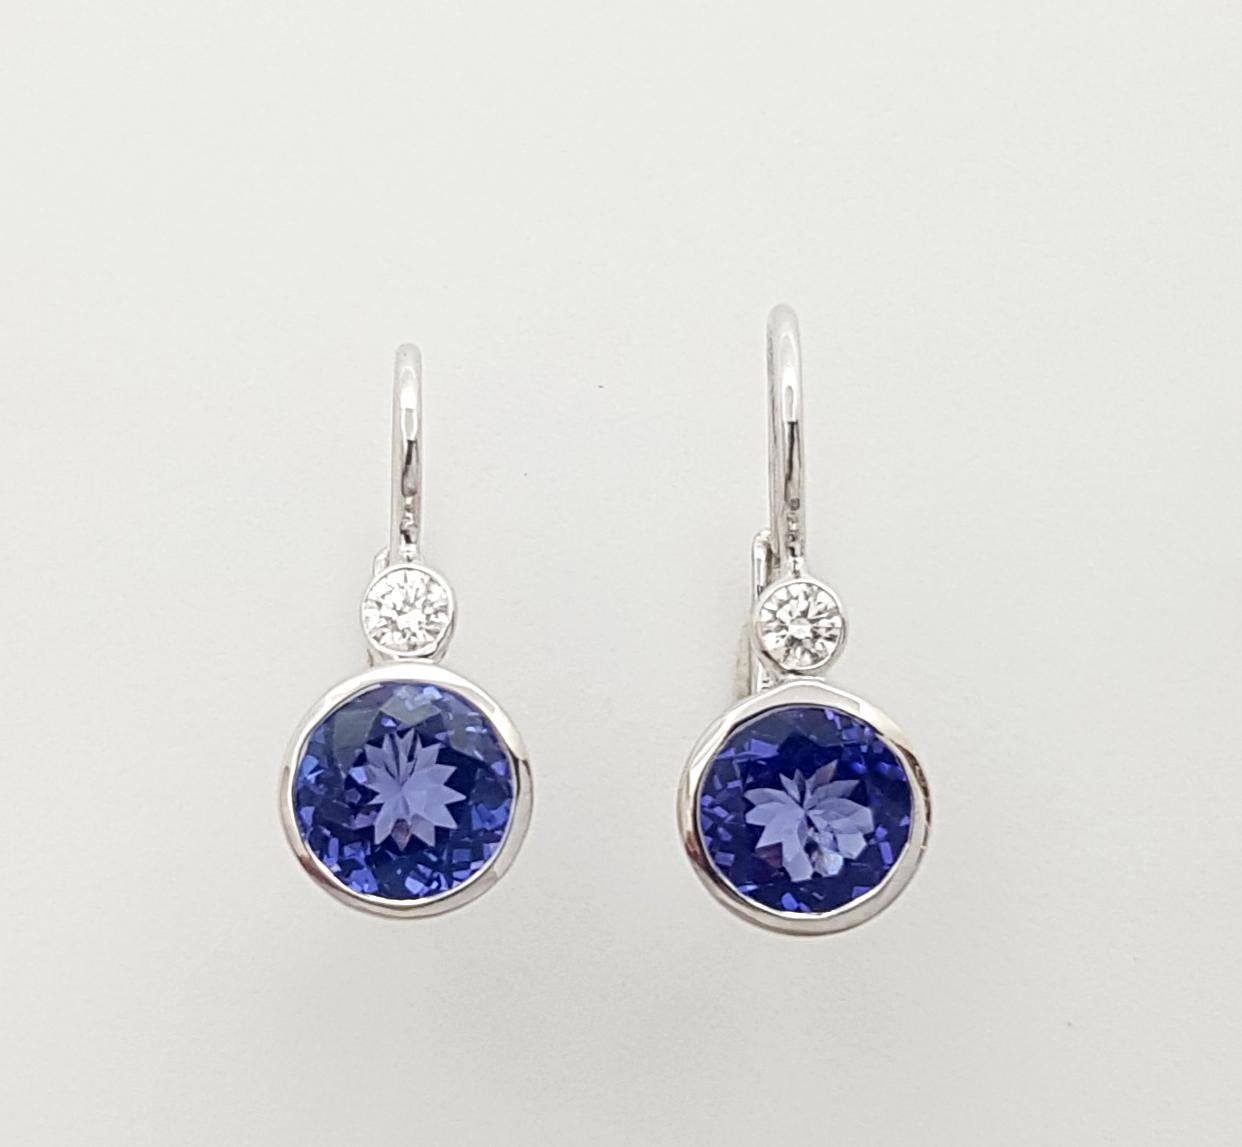 Tanzanite 2.61 carats with Diamond 0.17 carat Earrings set in 18K White Gold Settings

Width: 0.8 cm 
Length: 1.58 cm
Total Weight: 3.17 grams

